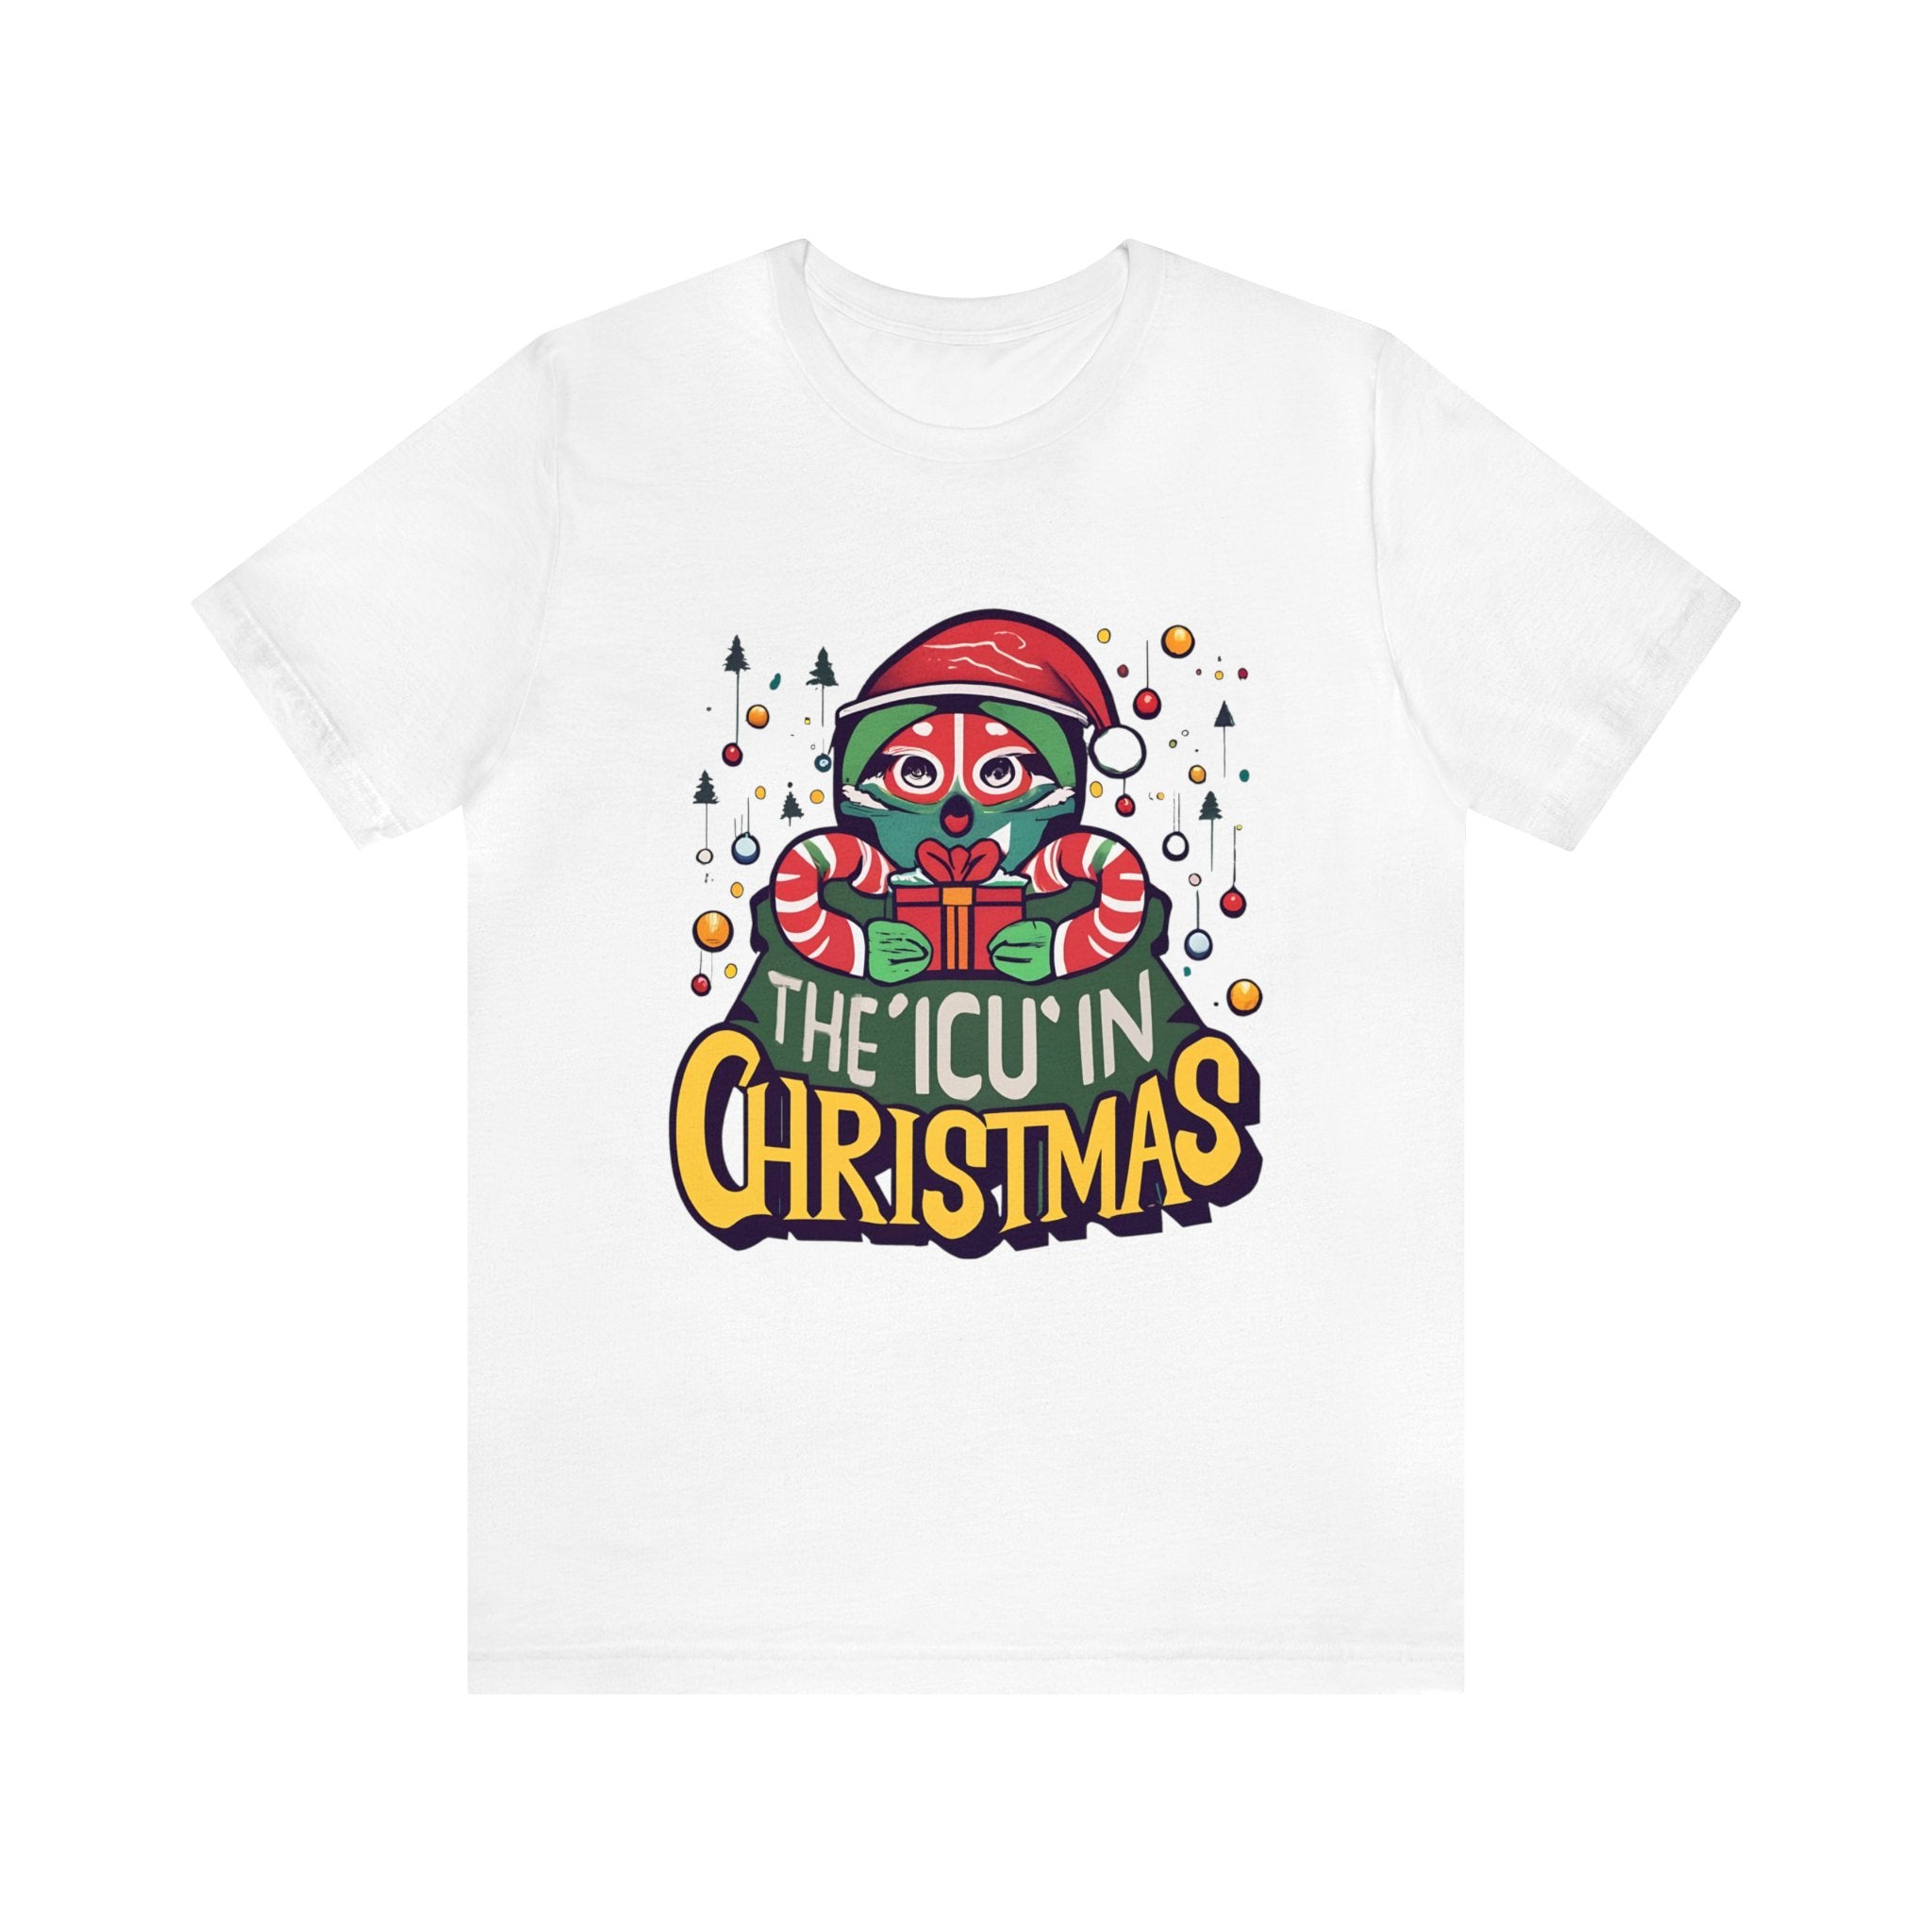 The ICU in Christmas Holiday Shirt For Nurses Or Doctors that Work in The ICU